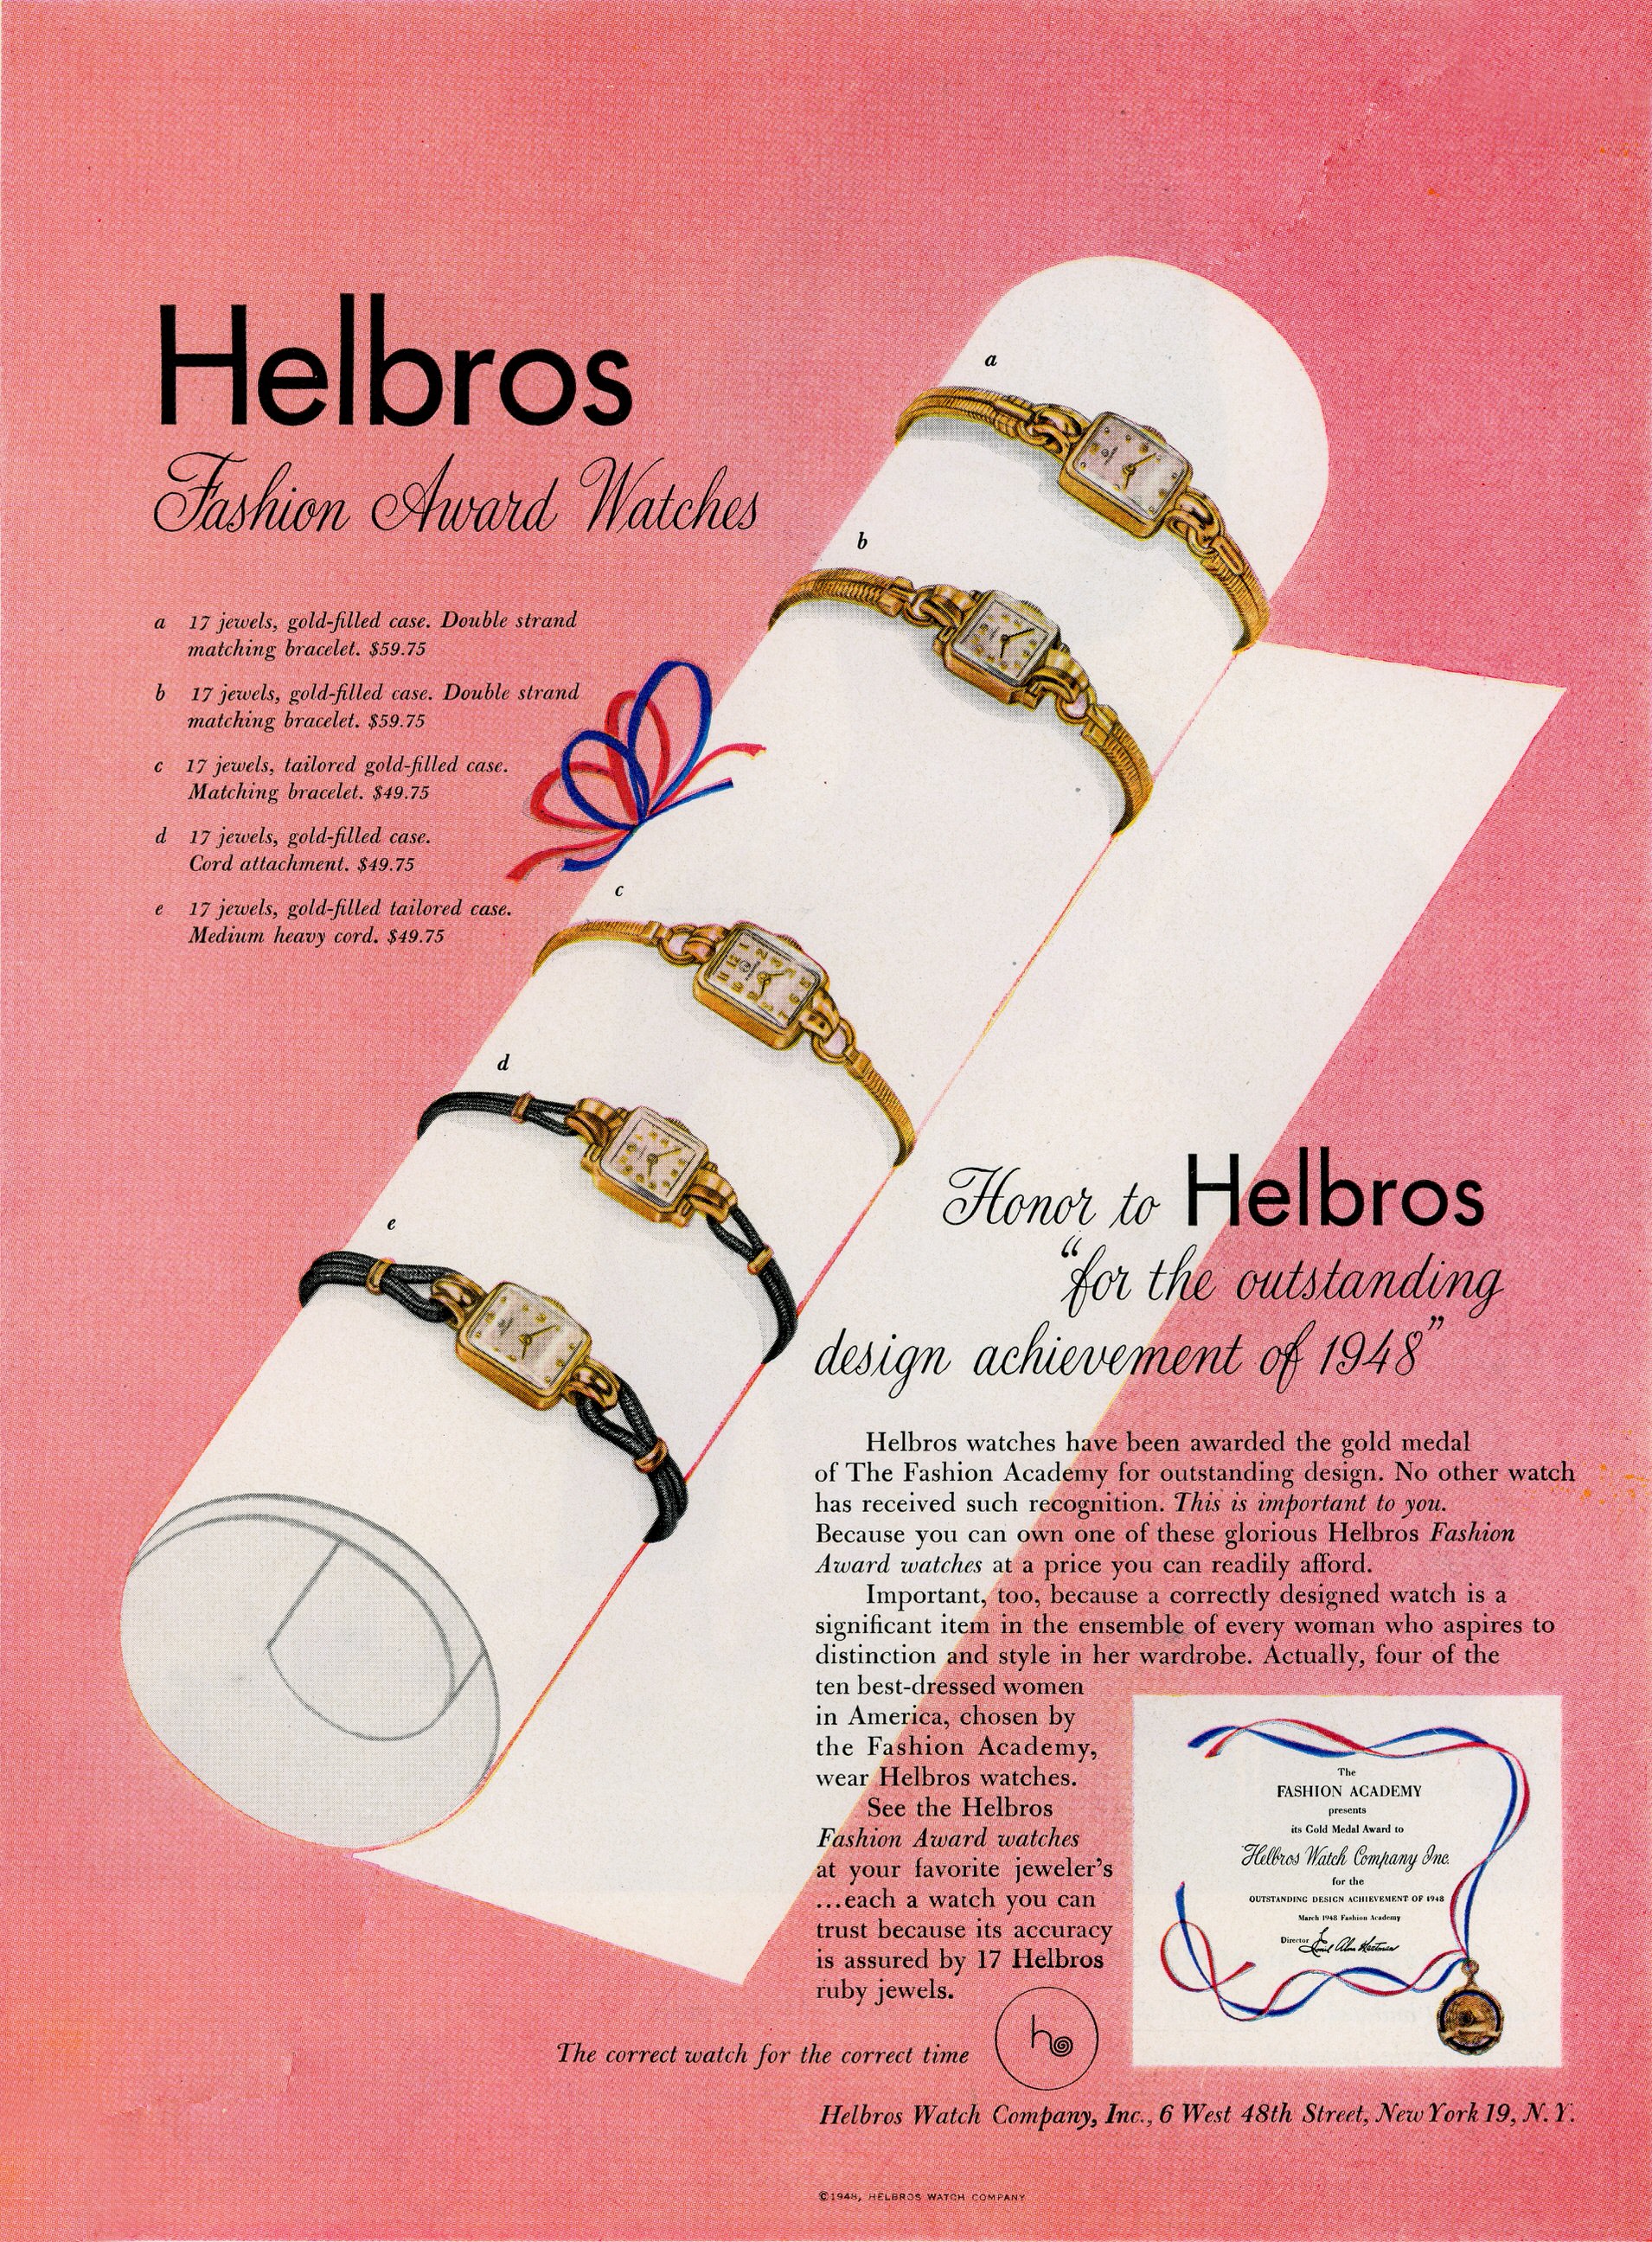 Helbros Watches | Paul Rand: Modernist Master 1914-1996